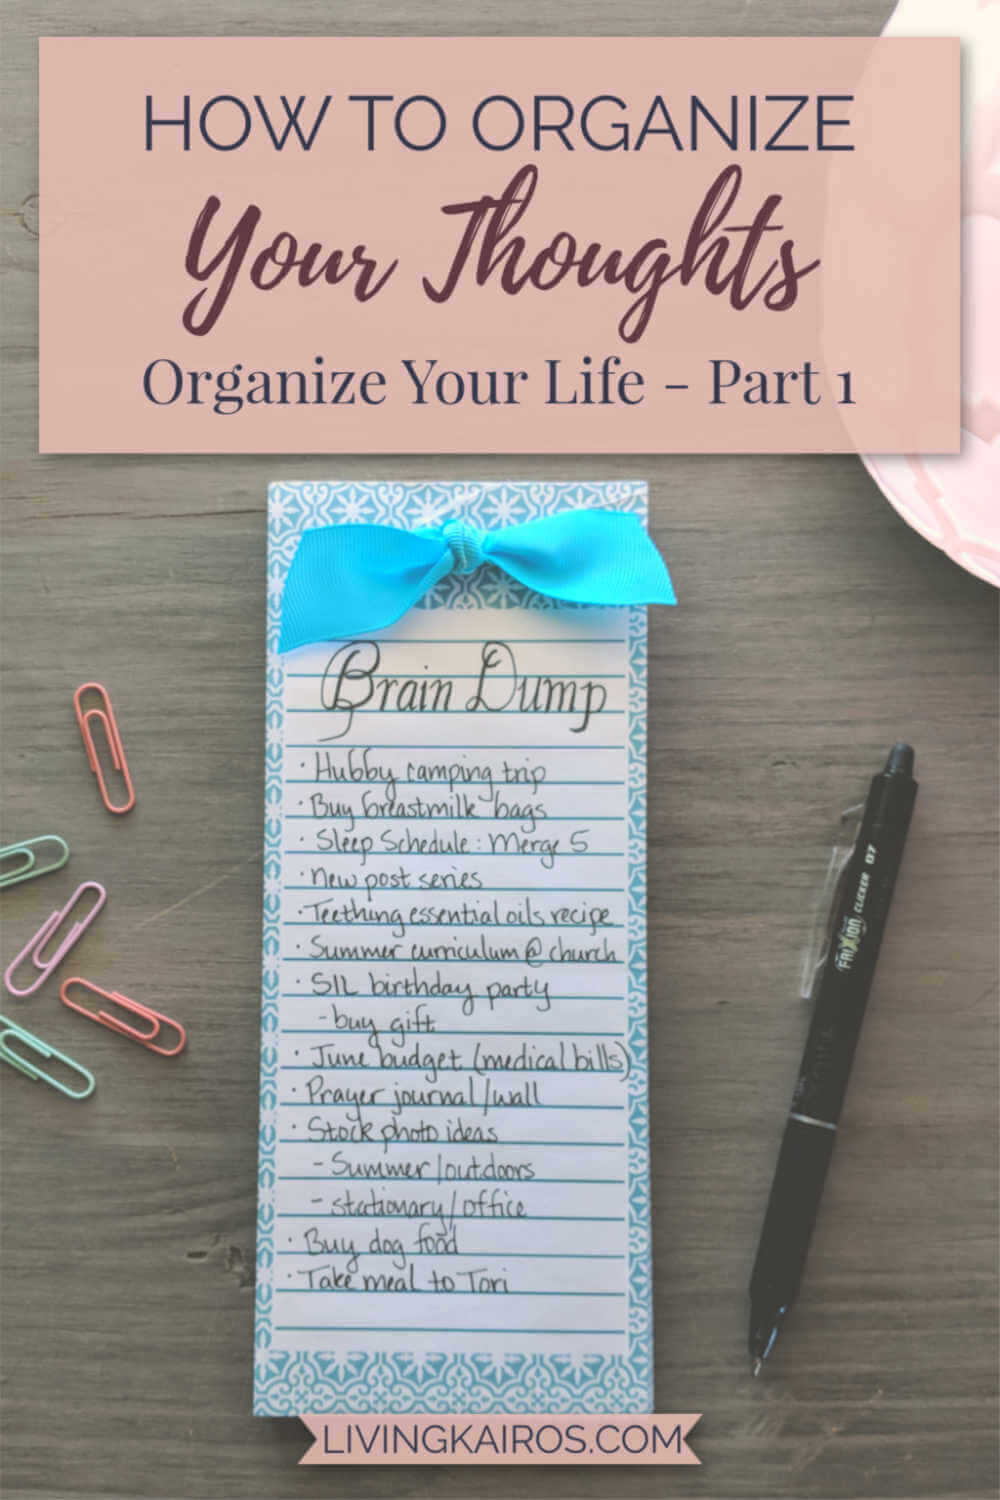 organization of thoughts essay